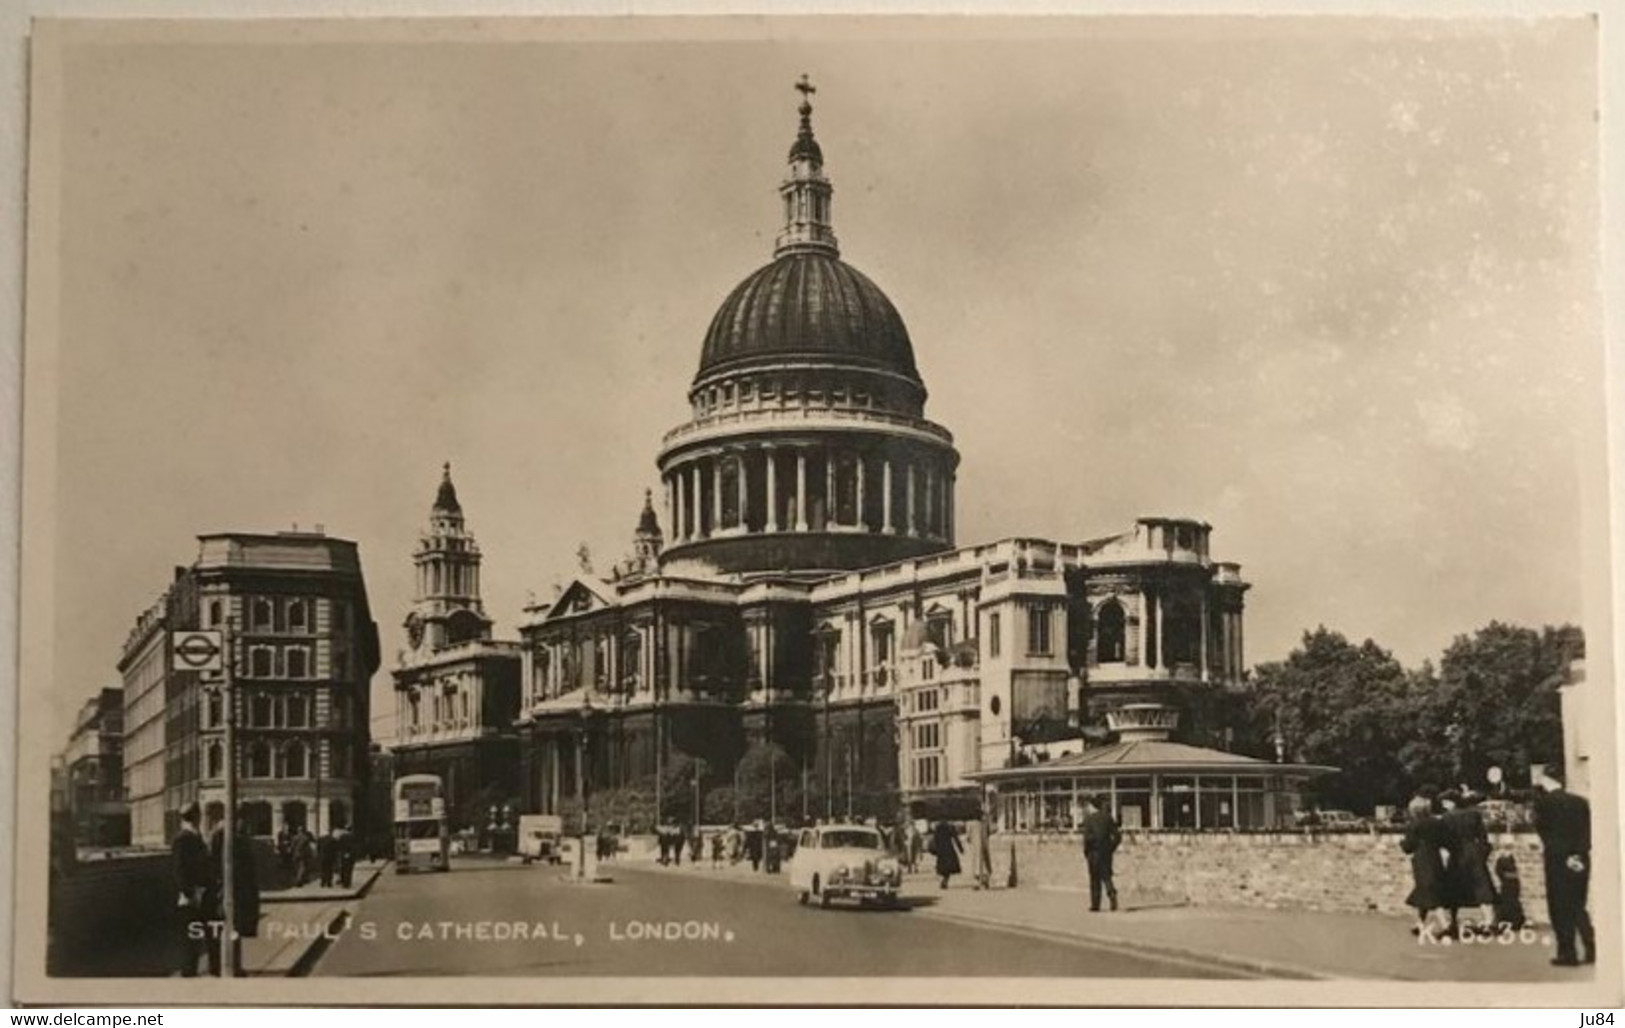 Royaume-Uni - Angleterre - London - St. Paul's Cathedral - Carte Postale Vierge - St. Paul's Cathedral